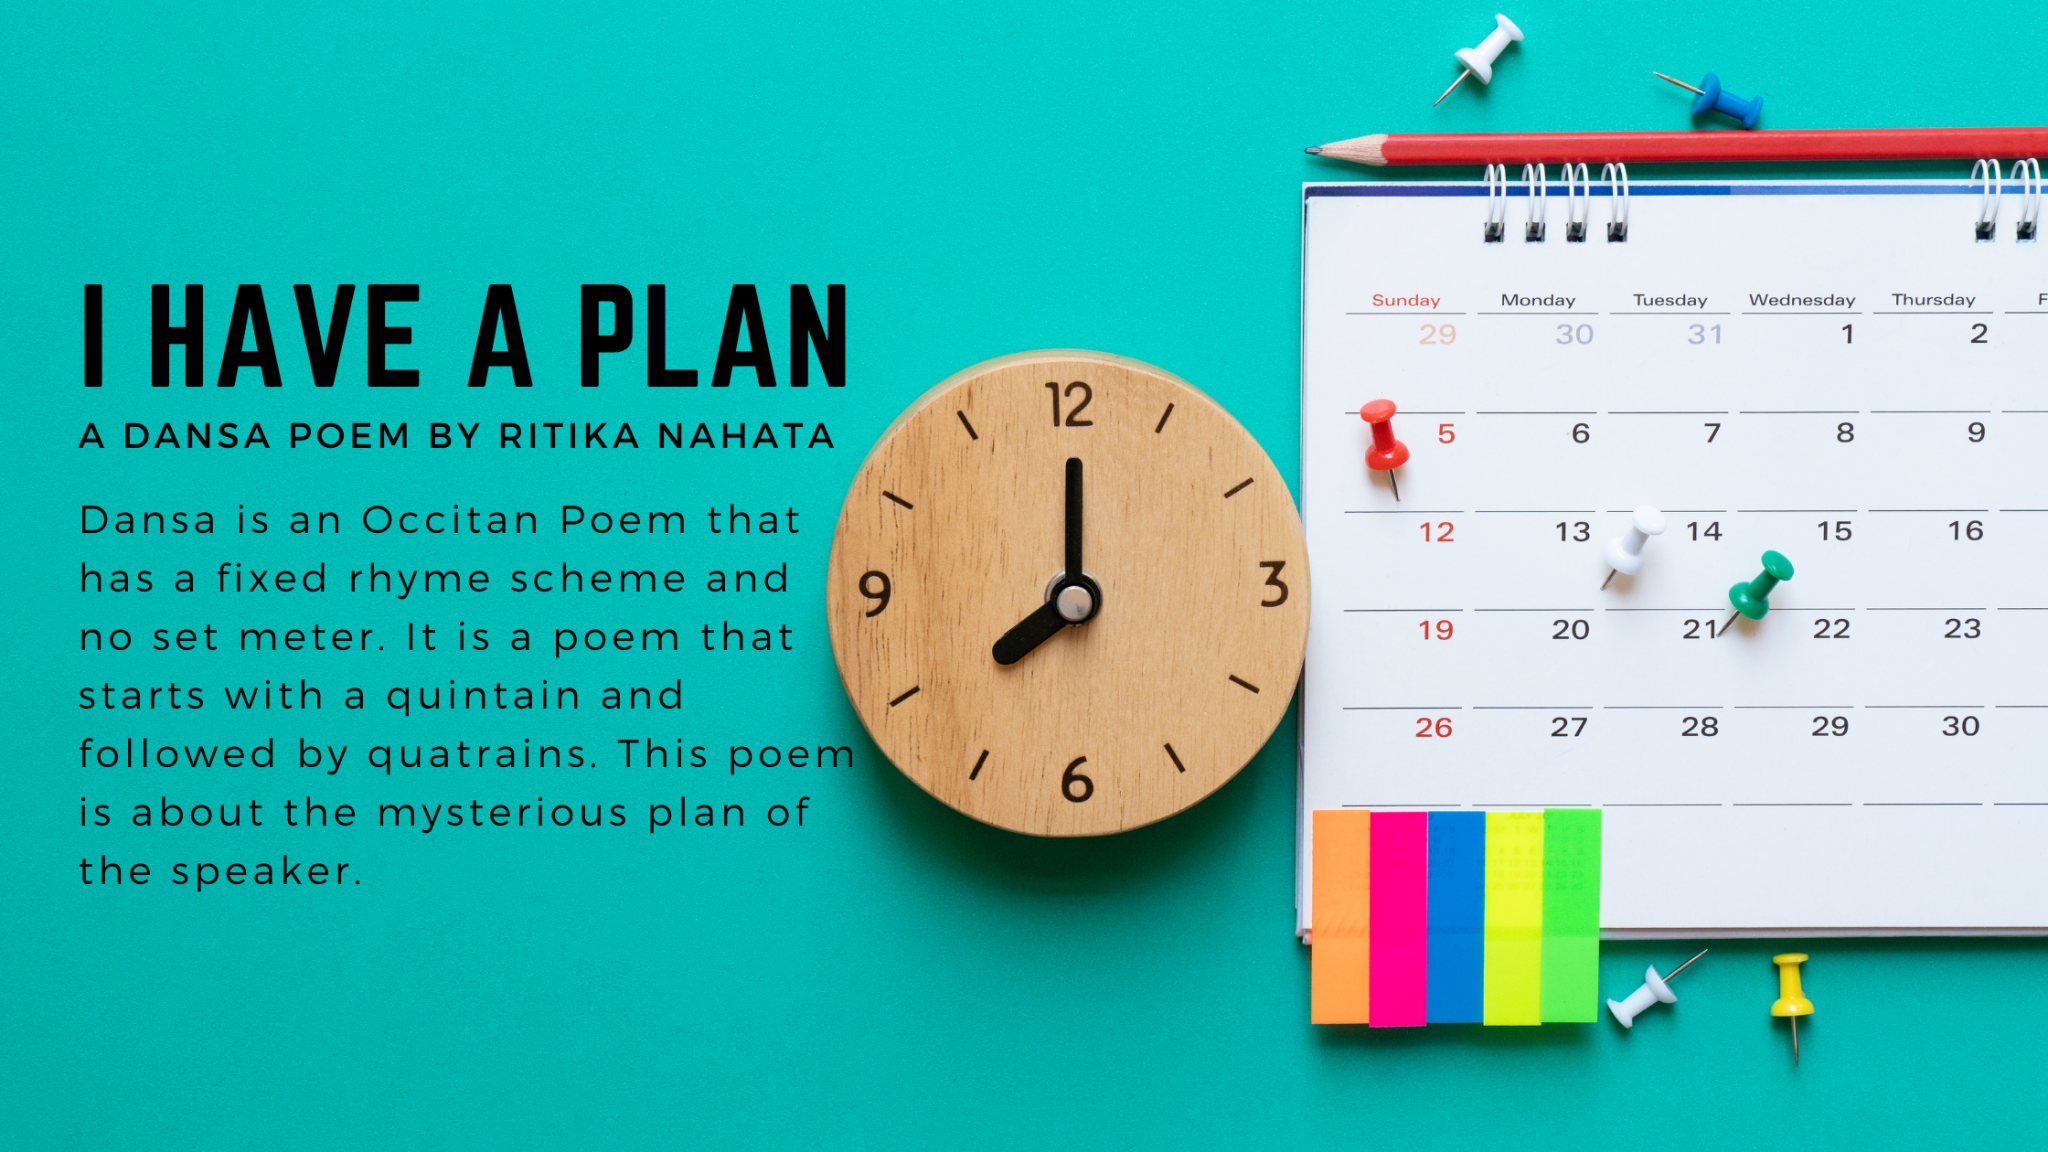 I Have A Plan | A Dansa Poem by Ritika Nahata at UpDivine